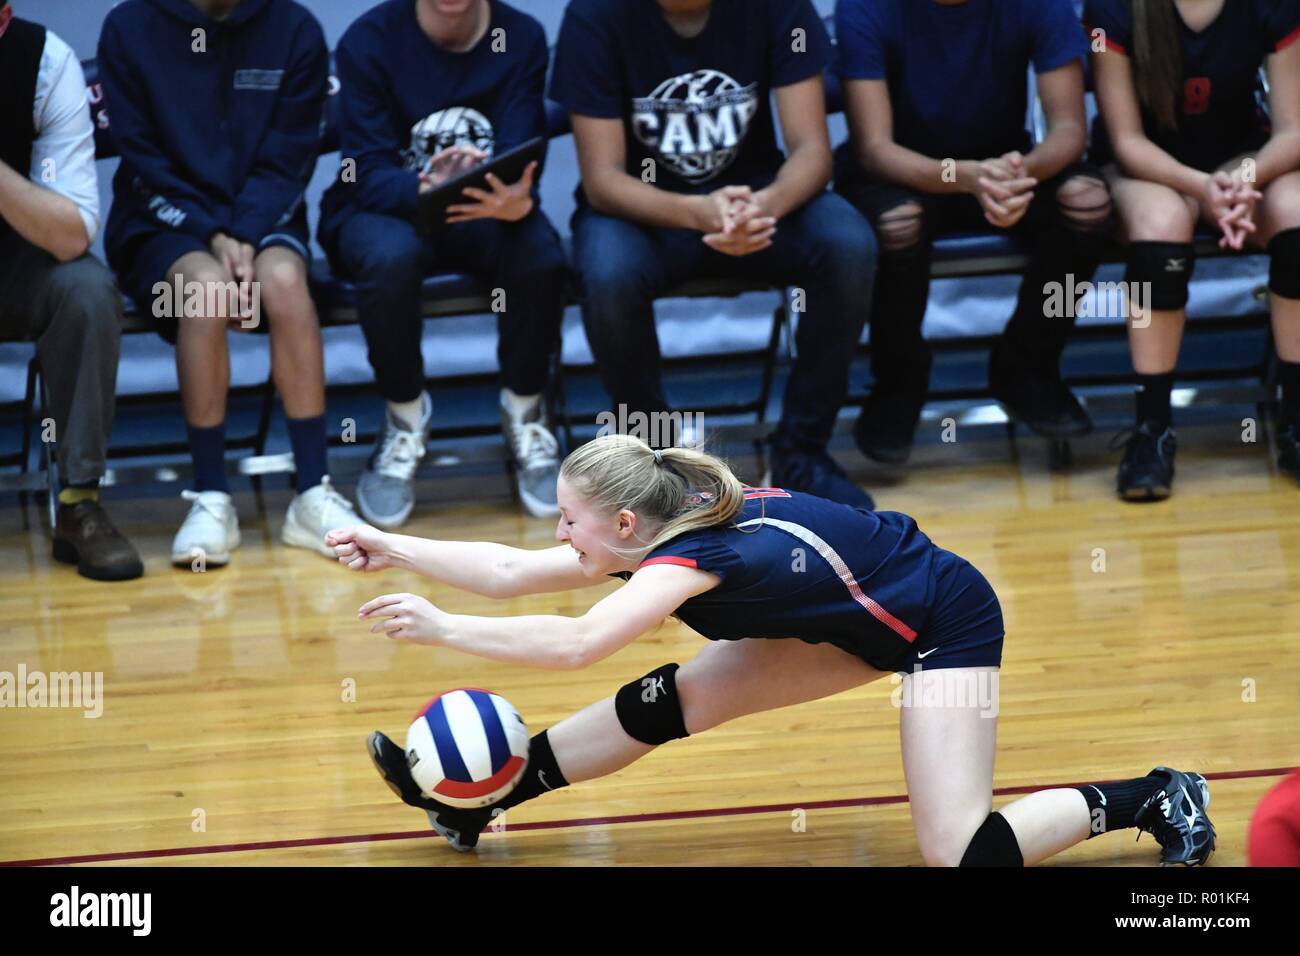 Player with an unsuccessful effort to dig an opposing kill shot. USA. Stock Photo